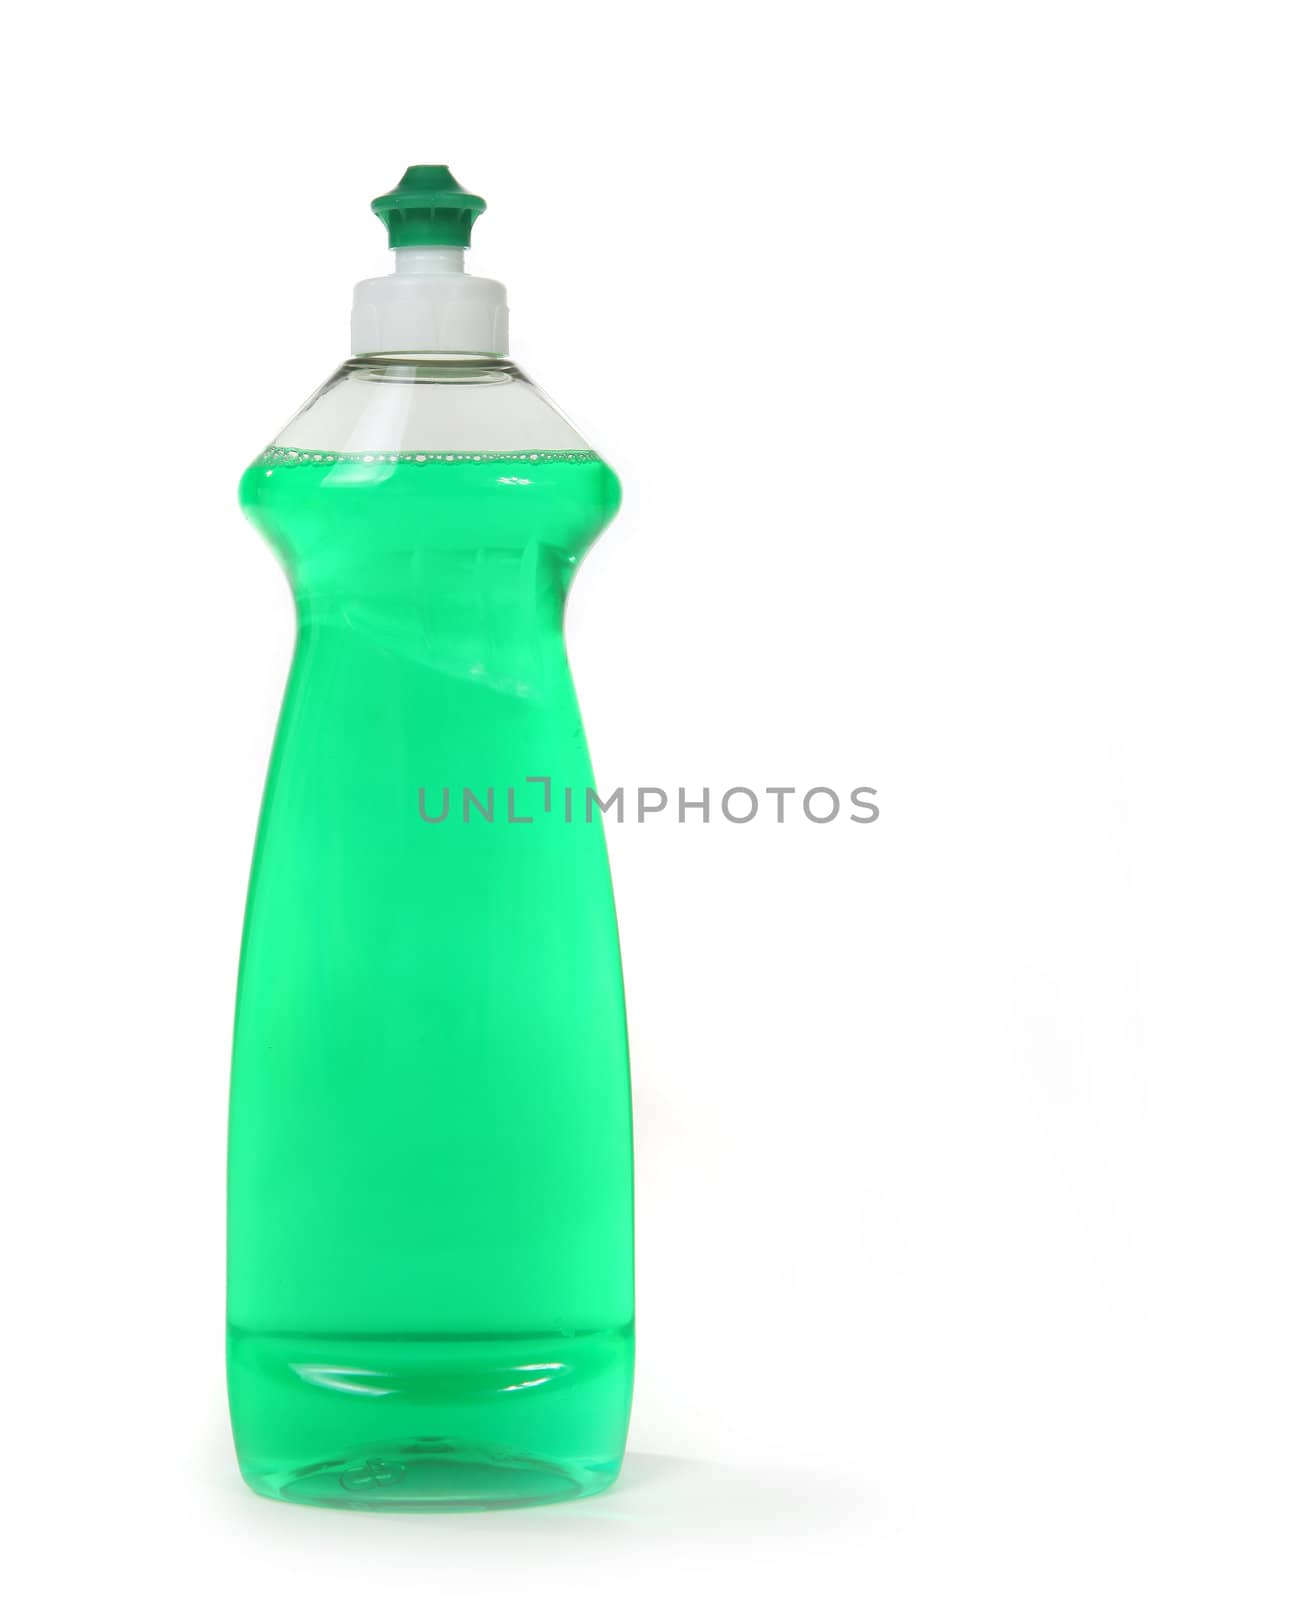 Green Dishwashing Liquid Soap in a Bottle Isolated on White Background